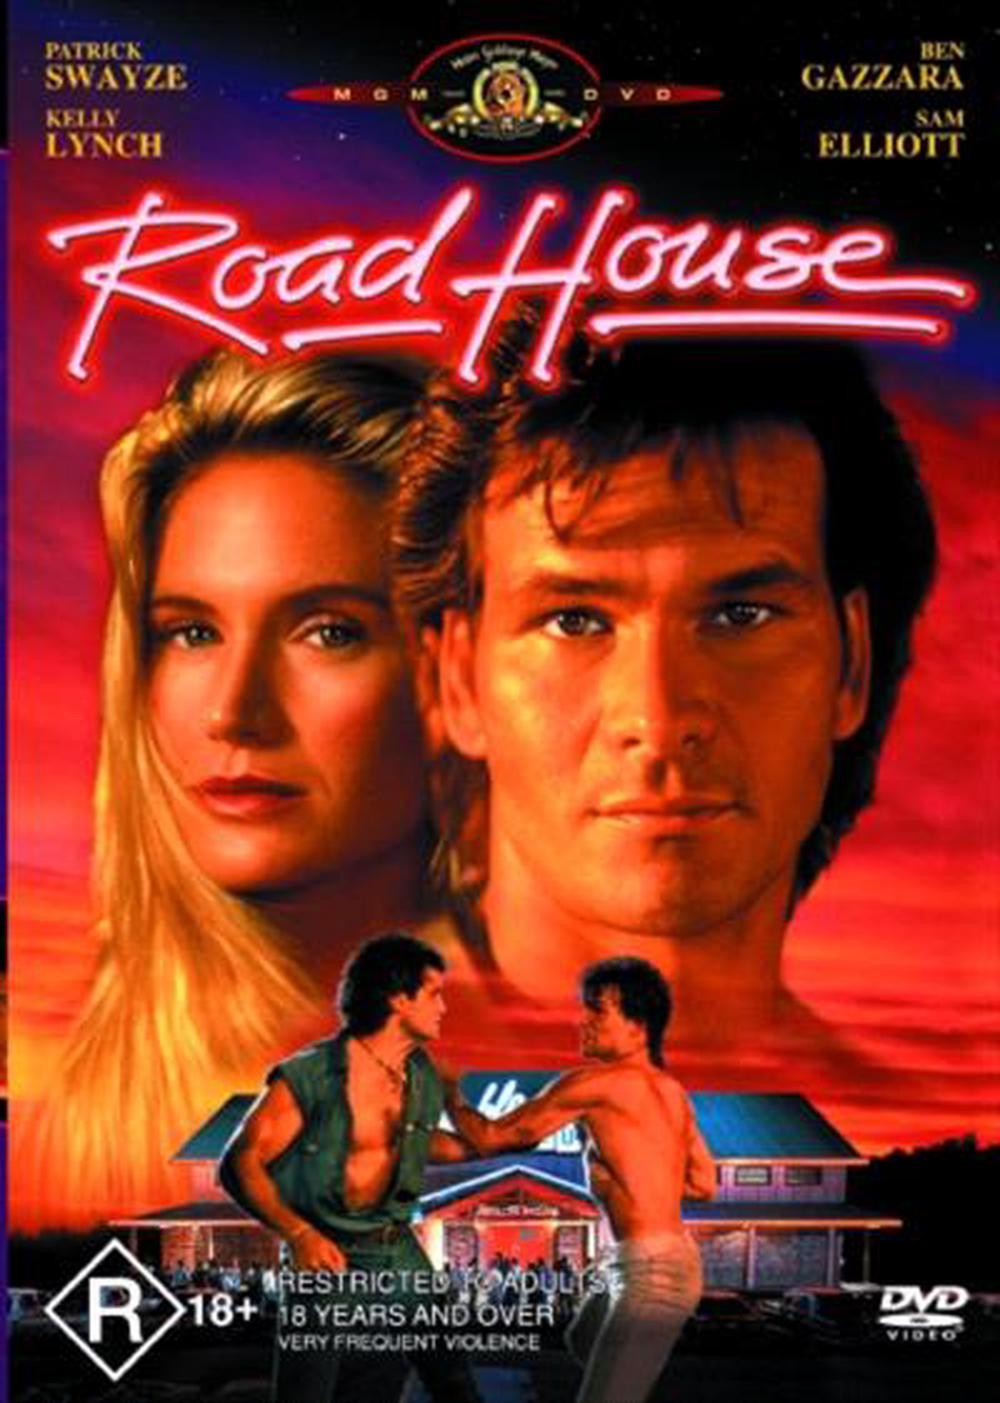 Road House (1989), DVD Buy online at The Nile